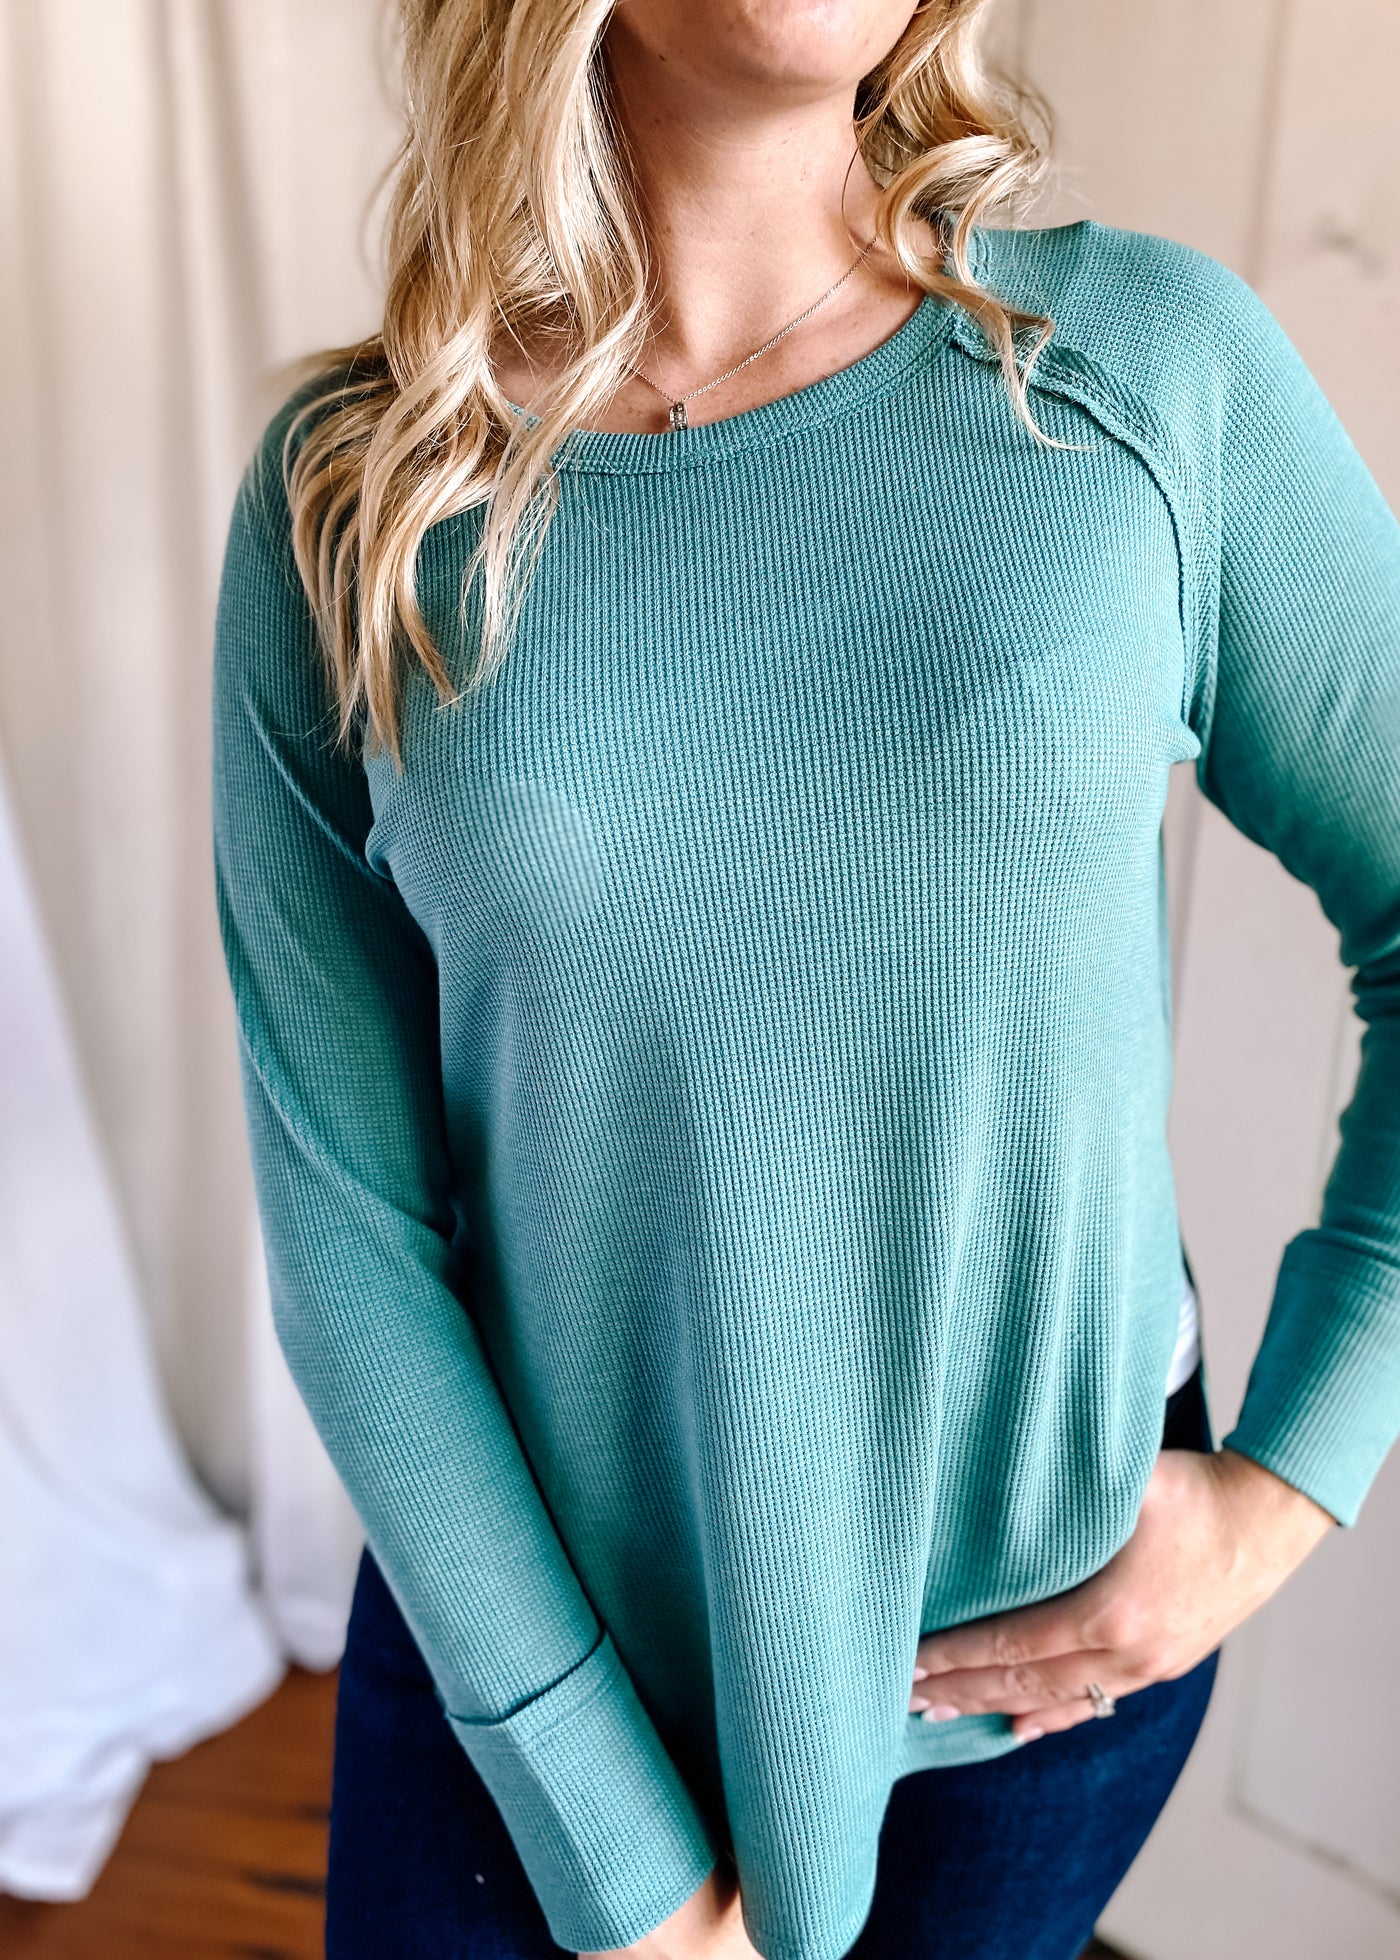 All Day, Every Day Top in Teal